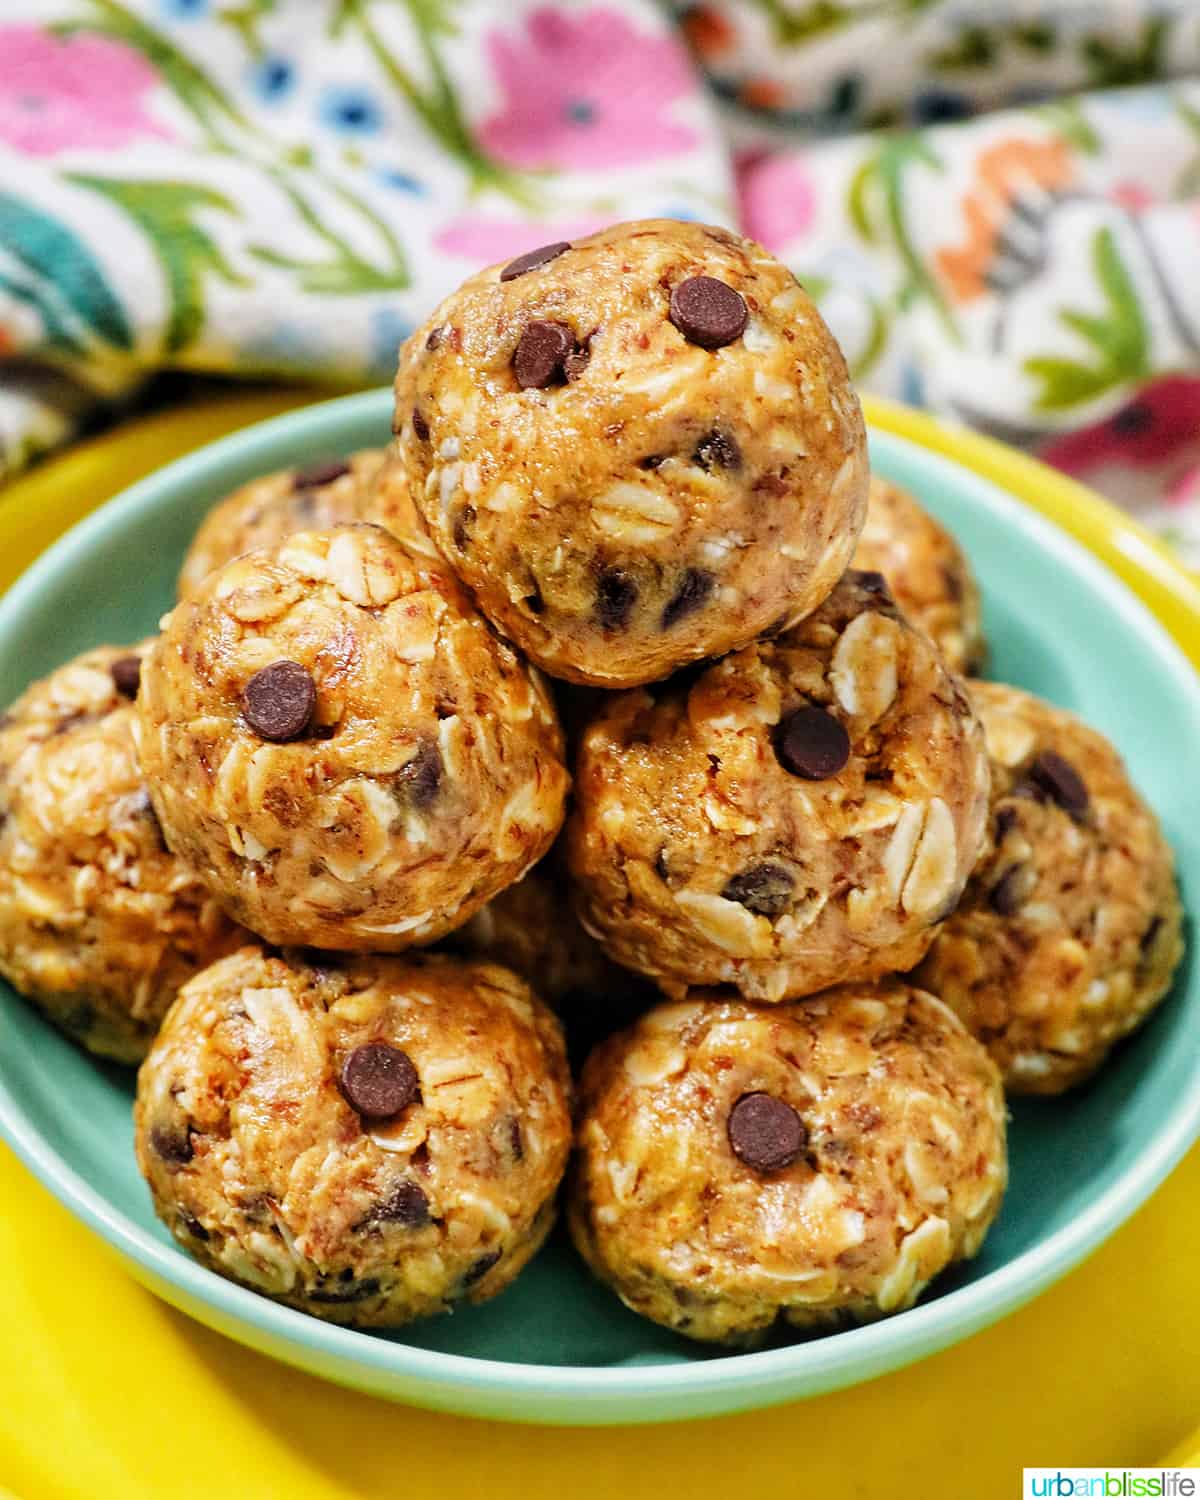 stack of Peanut Butter Chocolate Chip Oatmeal Balls on a green and yellow plate.